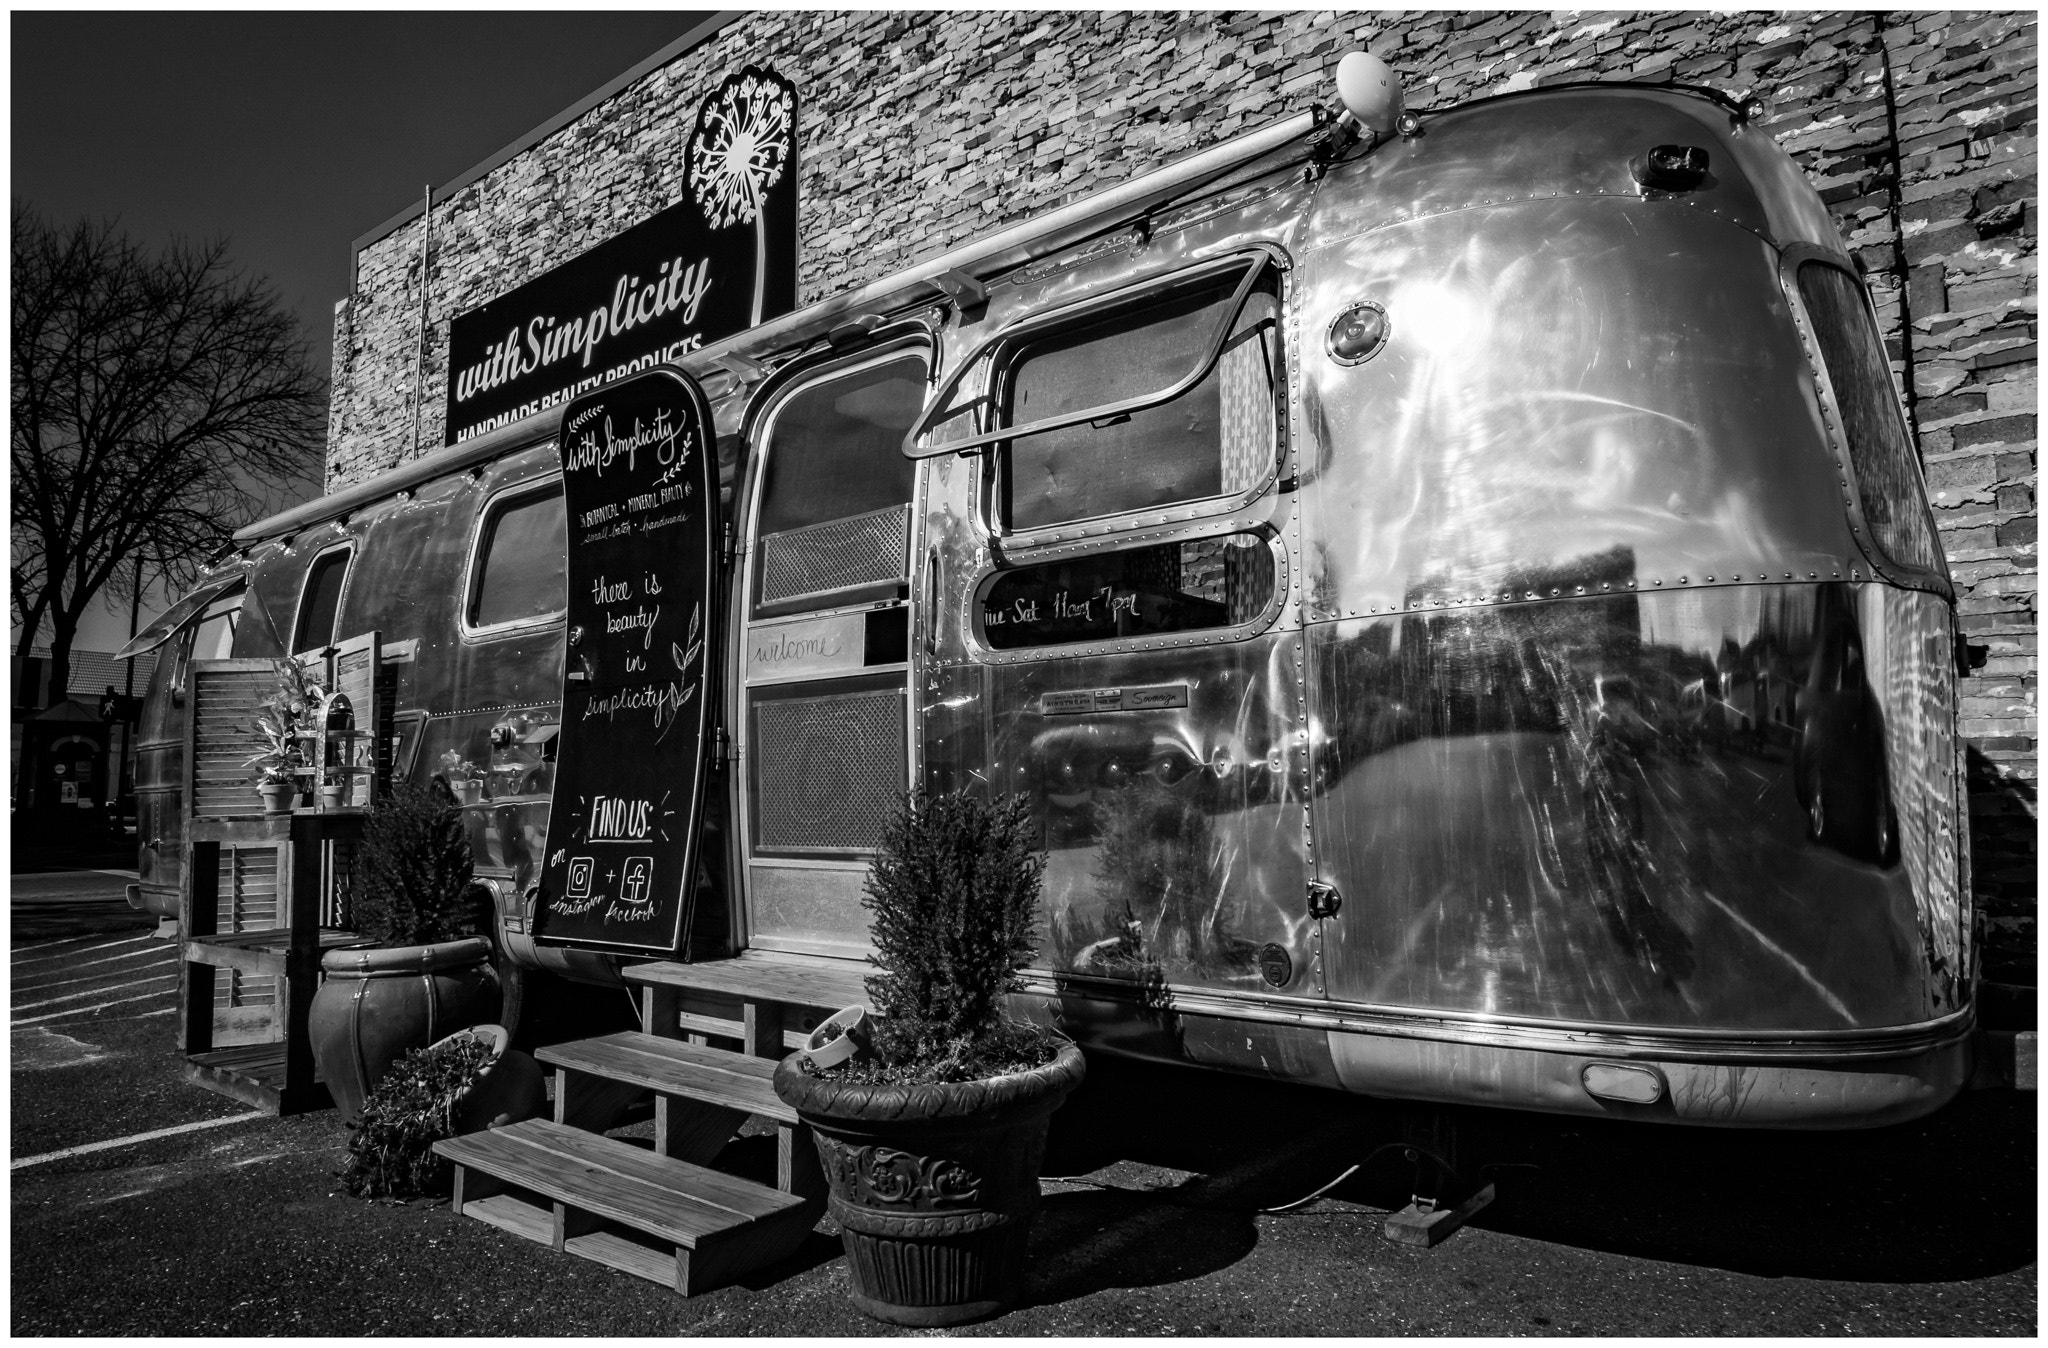 Tokina AT-X 11-20 F2.8 PRO DX Aspherical 11-20mm f/2.8 sample photo. Airstream business photography